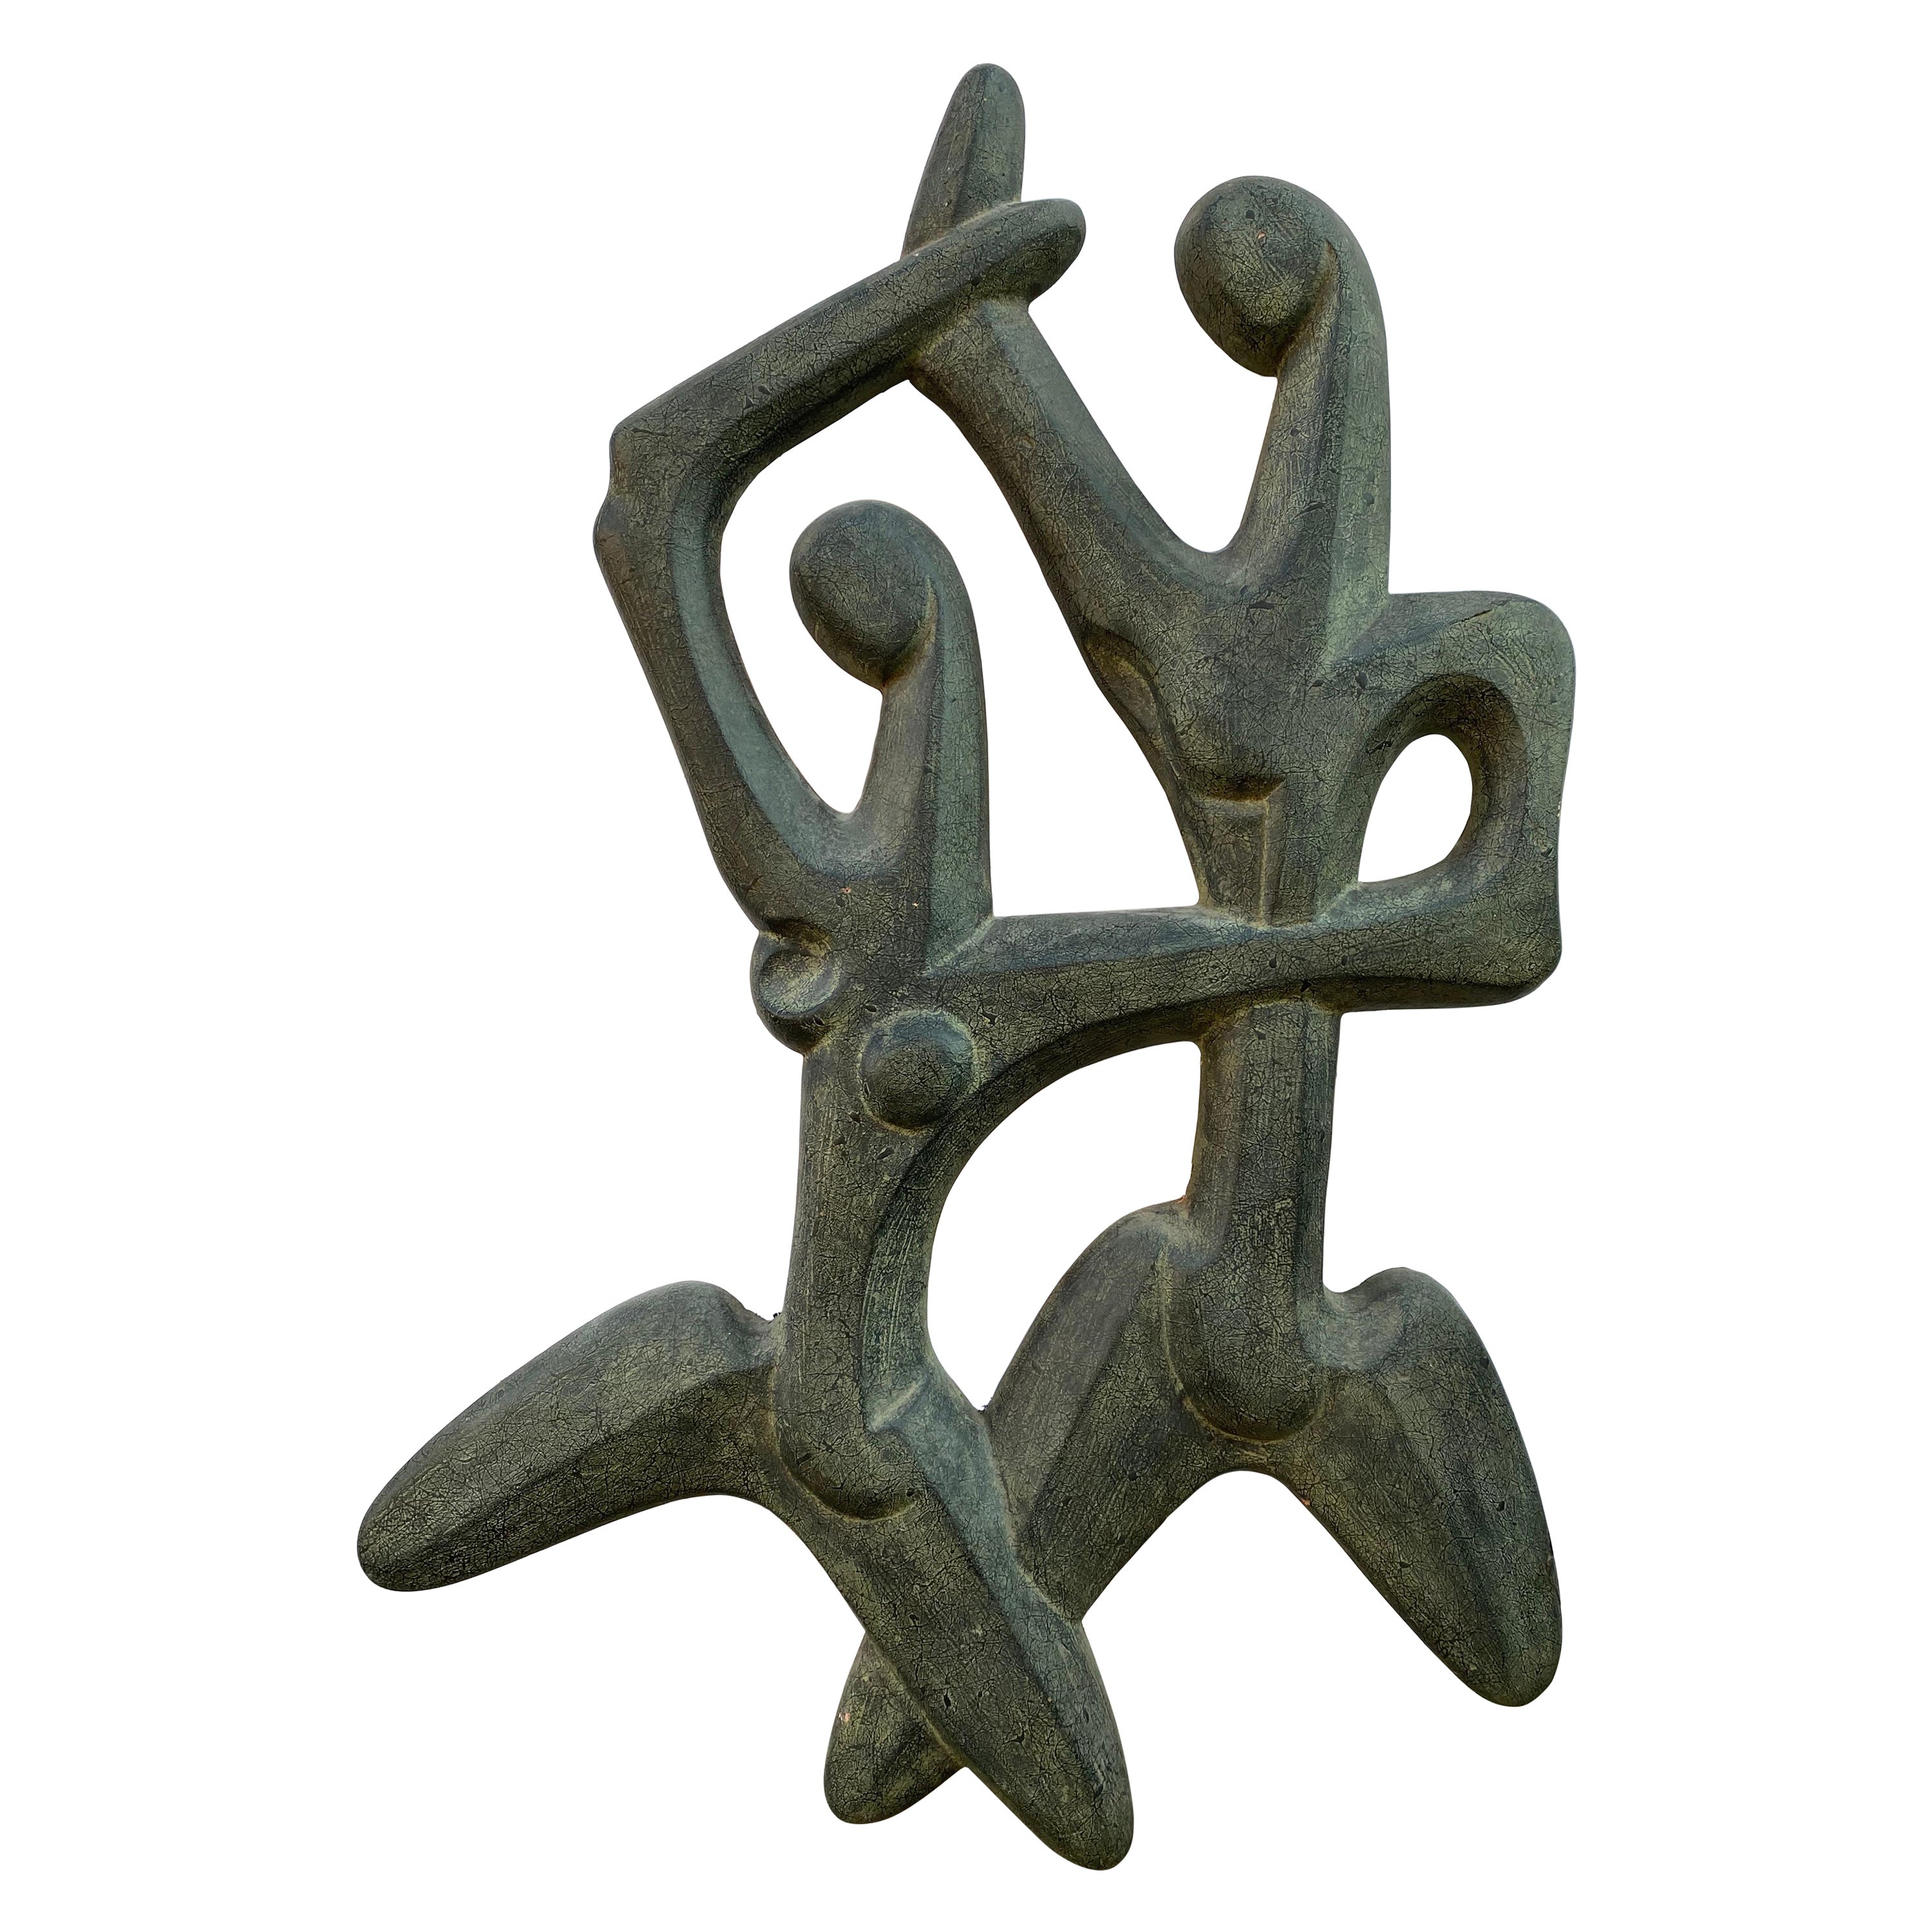 Frederic Weinberg Wall Sculpture "Swing"